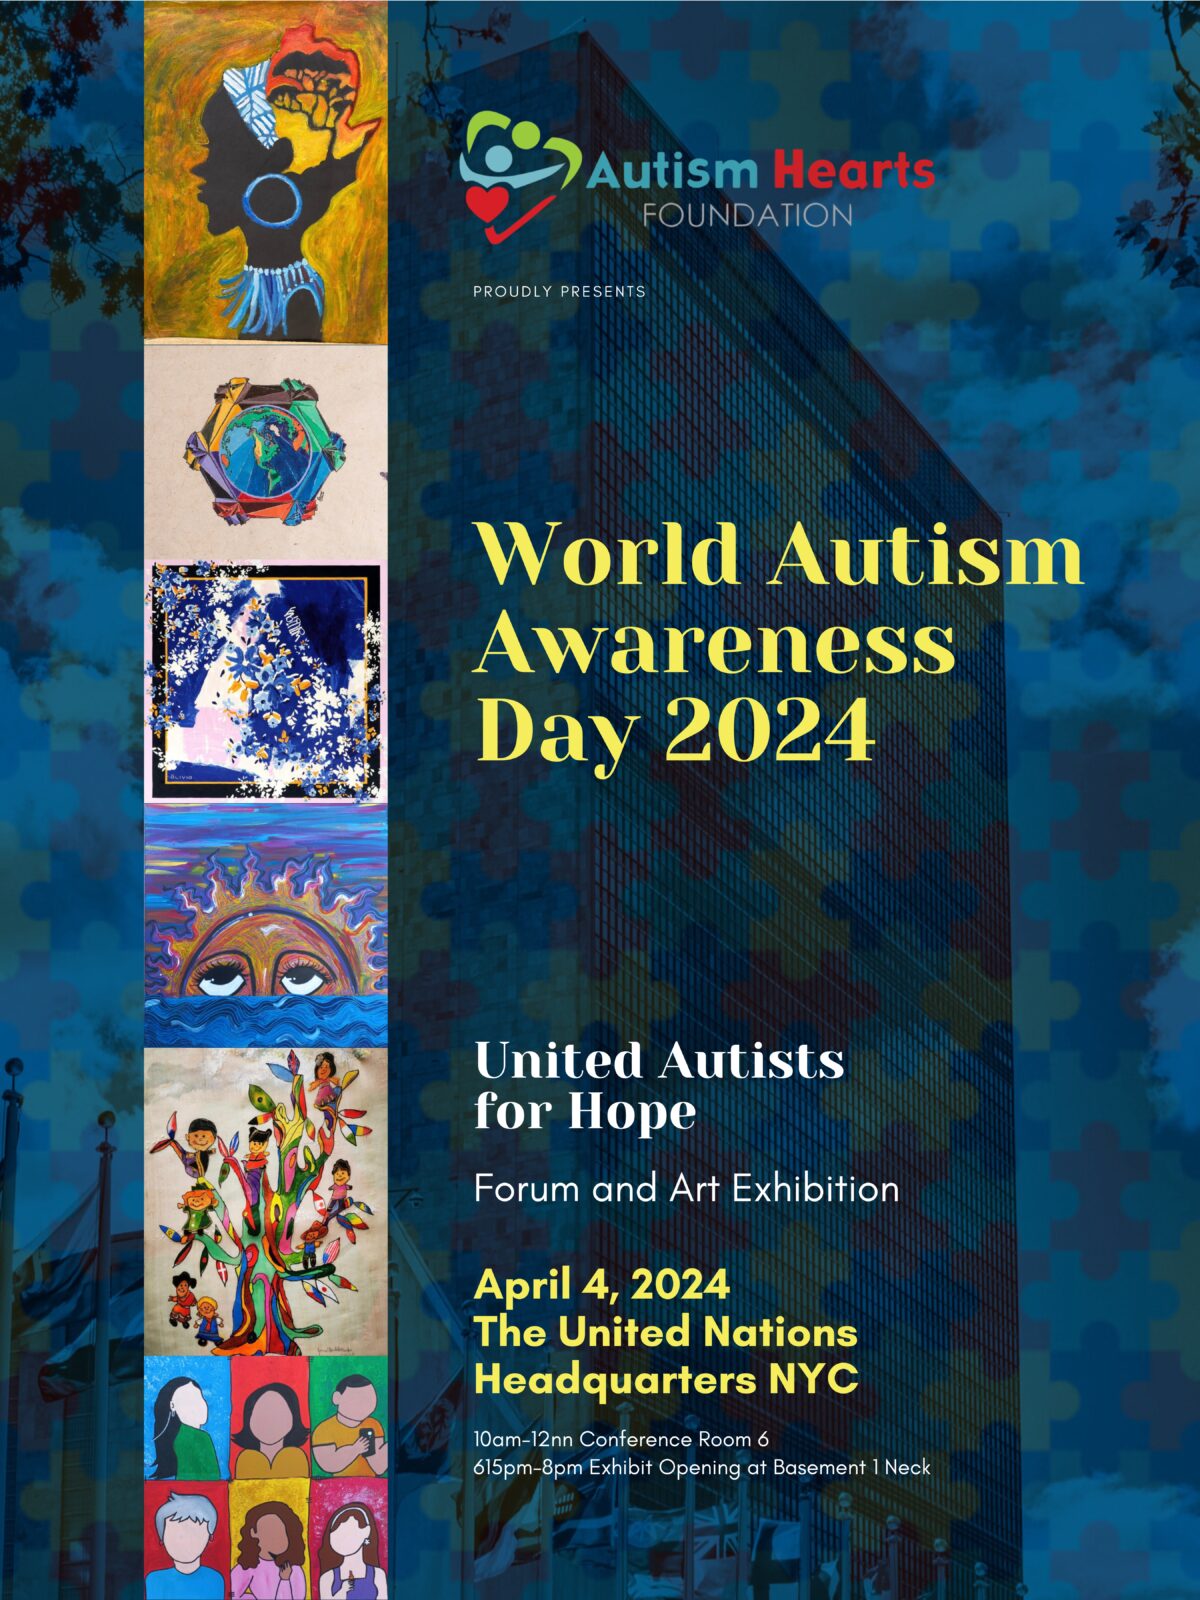 Autism event poster